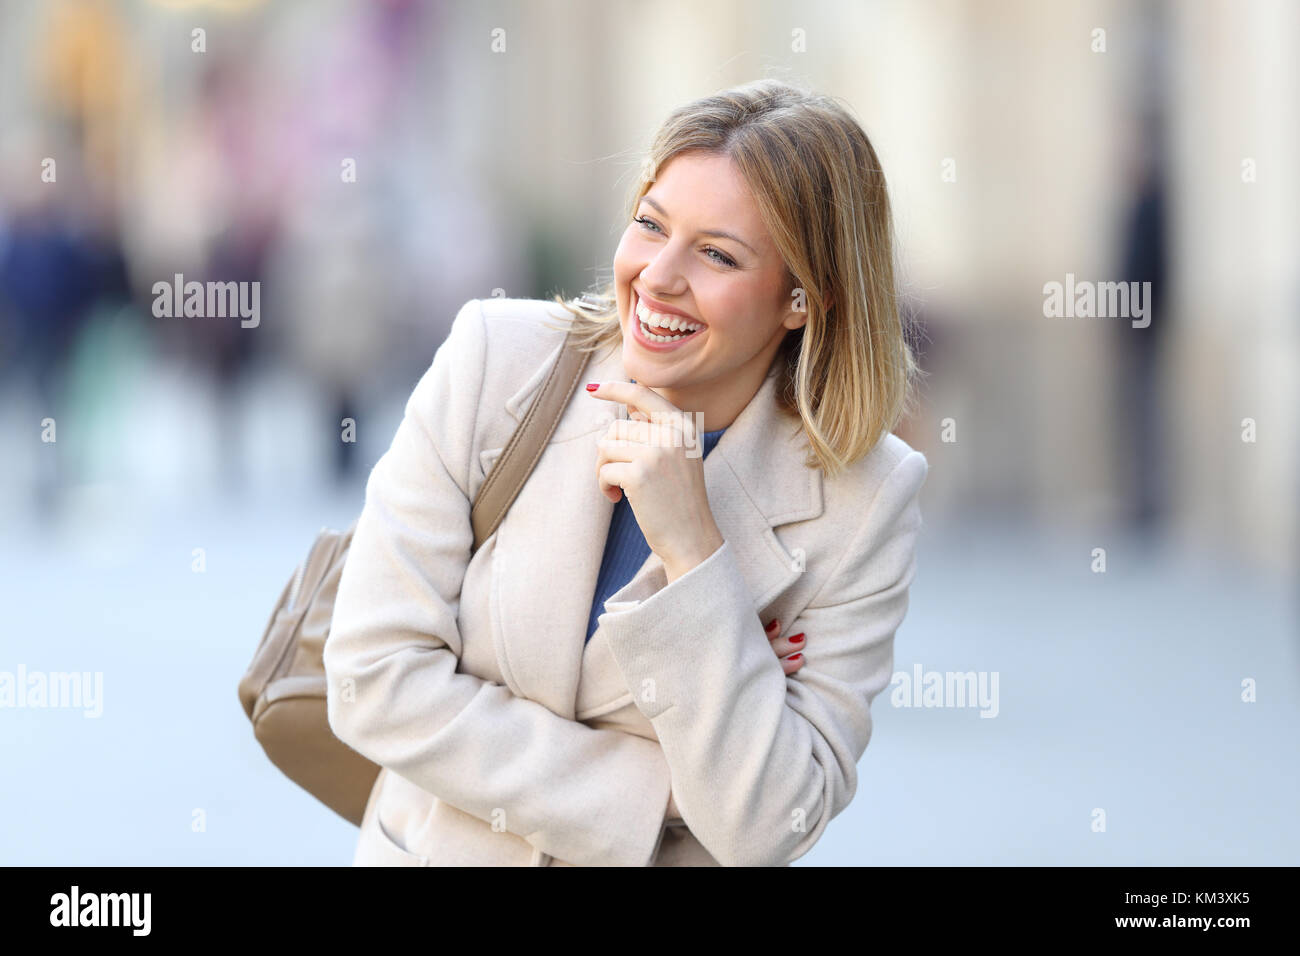 Portrait of a candid woman laughing alone on the street in winter Stock Photo